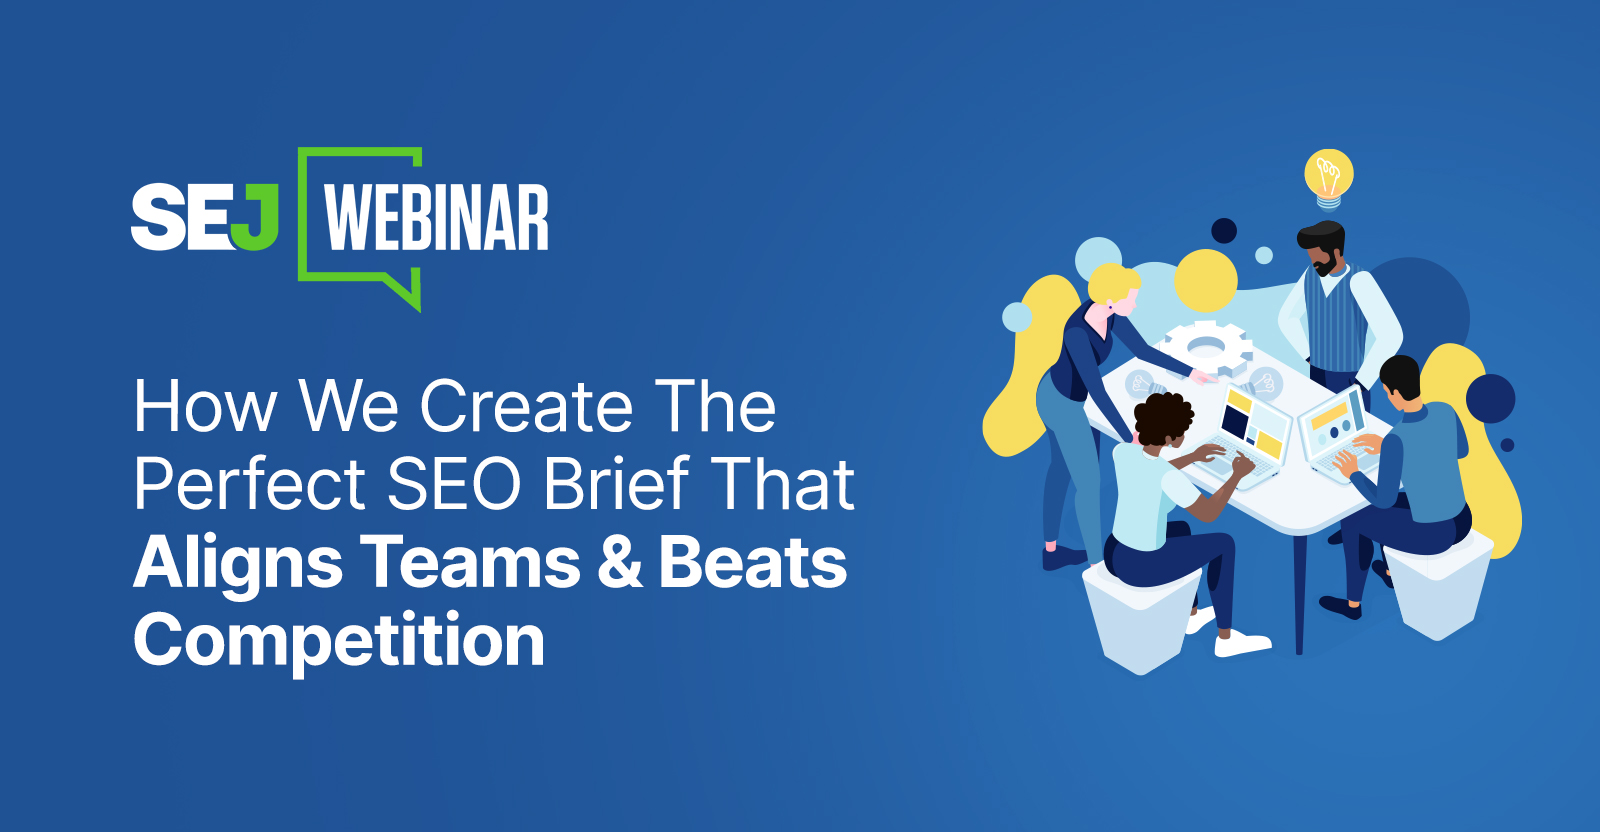 How We Create The Perfect SEO Brief That Aligns Teams & Beats Competition [Webinar] via @sejournal, @hethr_campbell